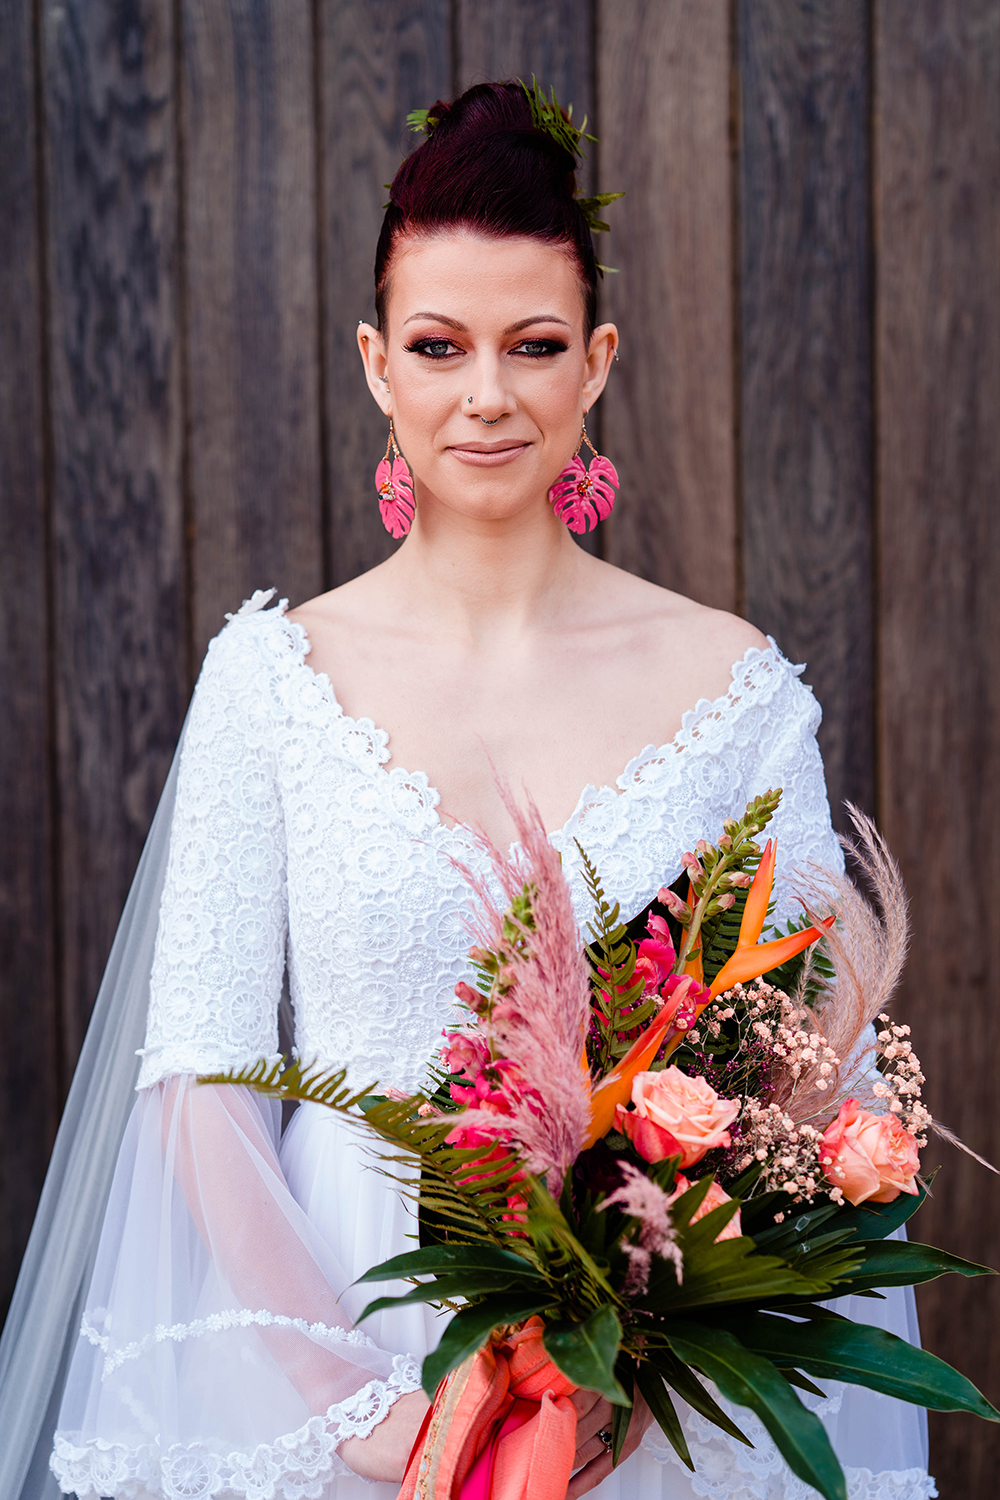 The wedding bouquet was done with pink, blush and orange blooms, leaves and pink pampas grass